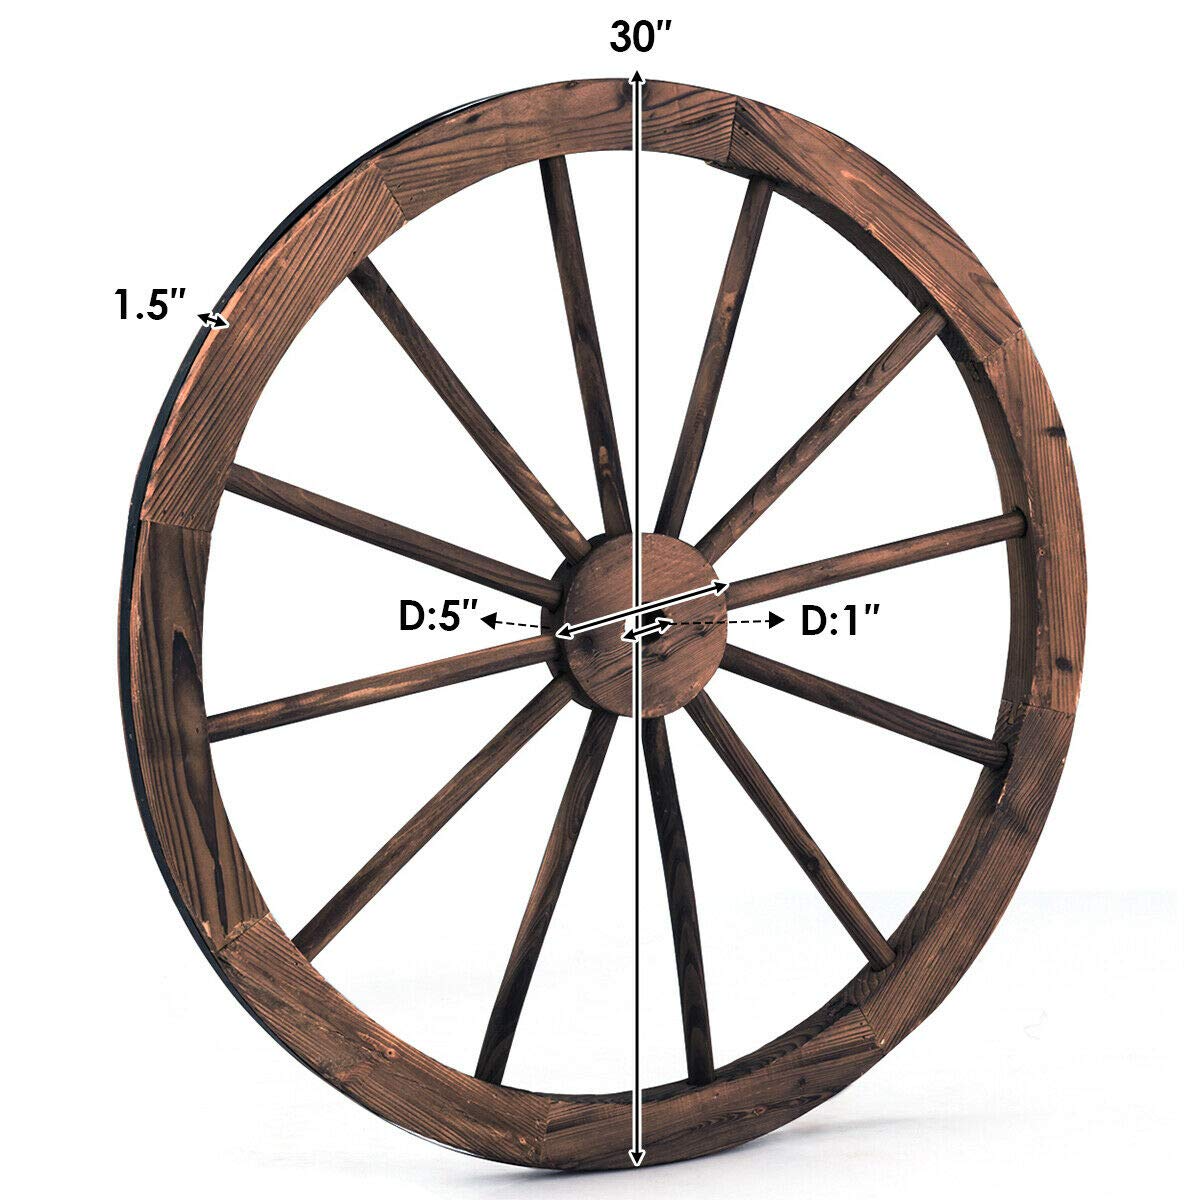 Giantex 30-Inch Set of Two Decorative Wooden Wheel